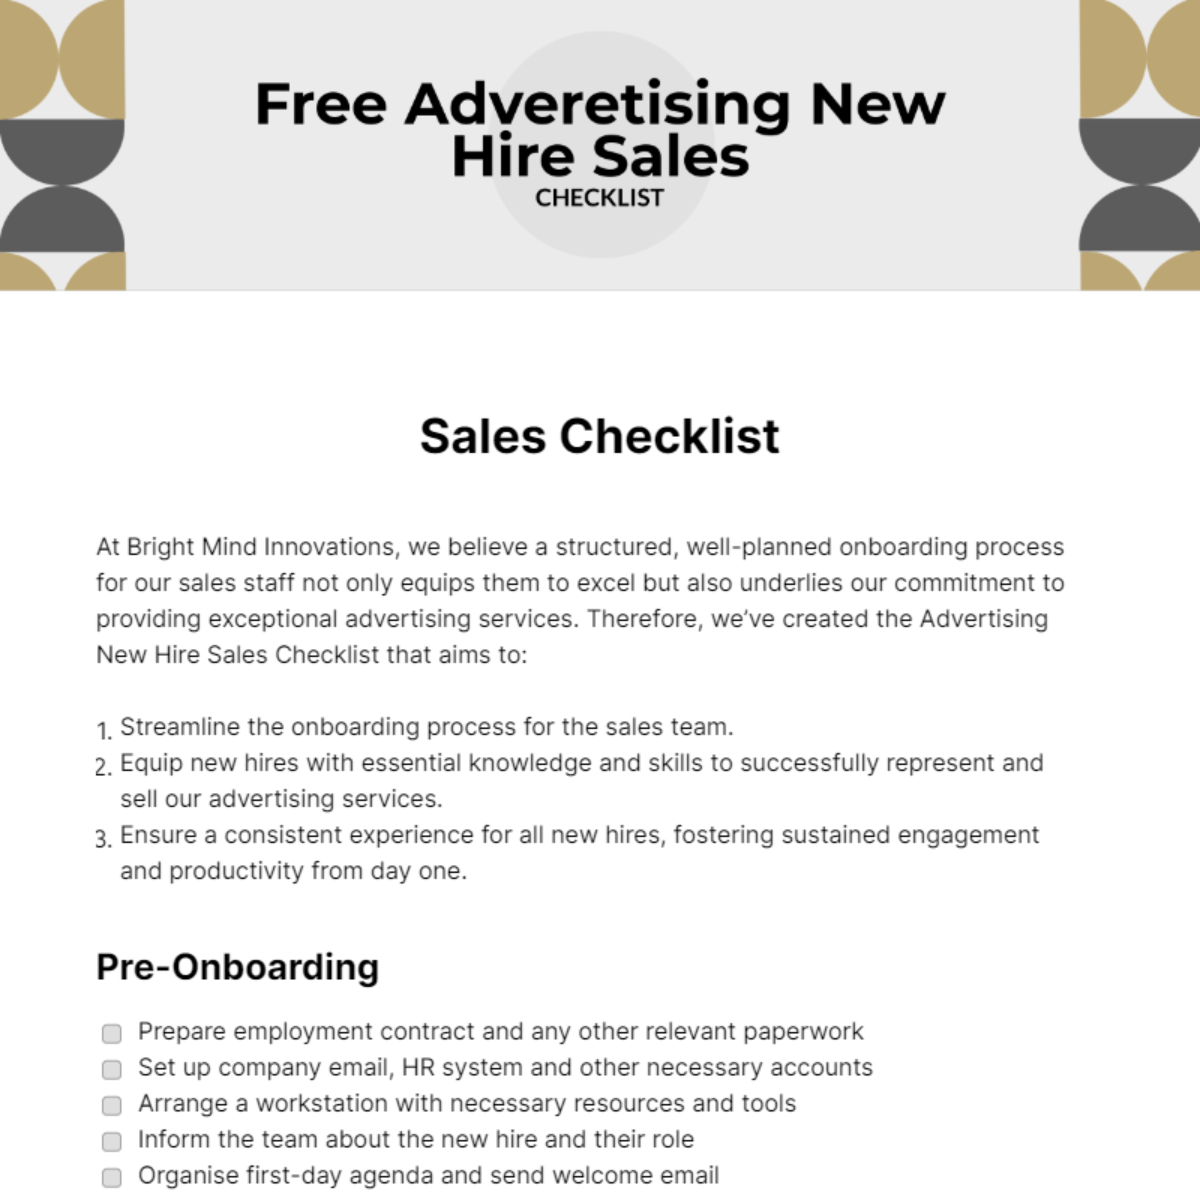 Adveretising New Hire Sales Checklist Template